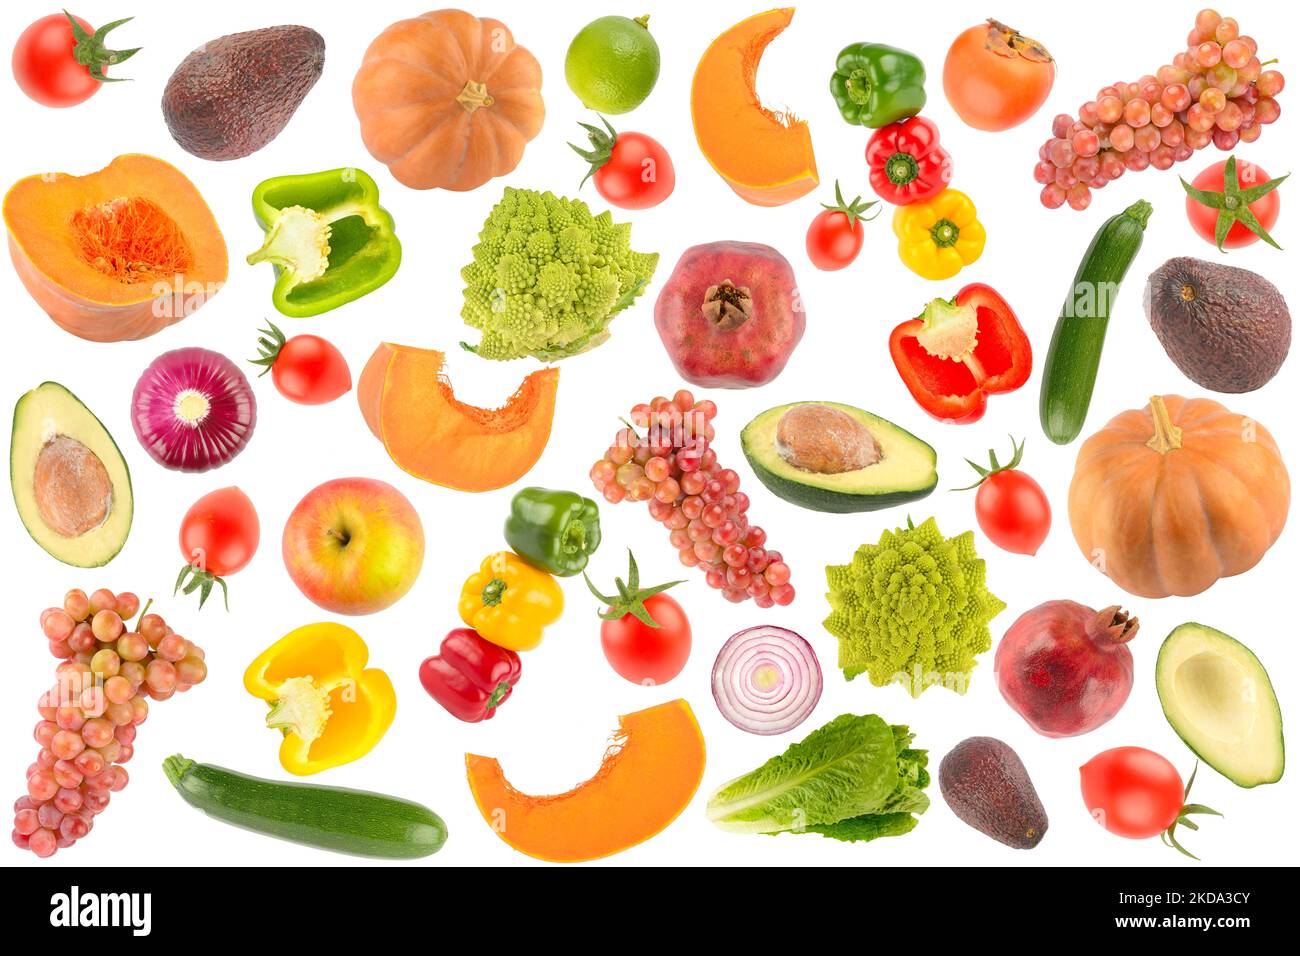 Background of colorful vegetables, fruits and berries on white Stock Photo